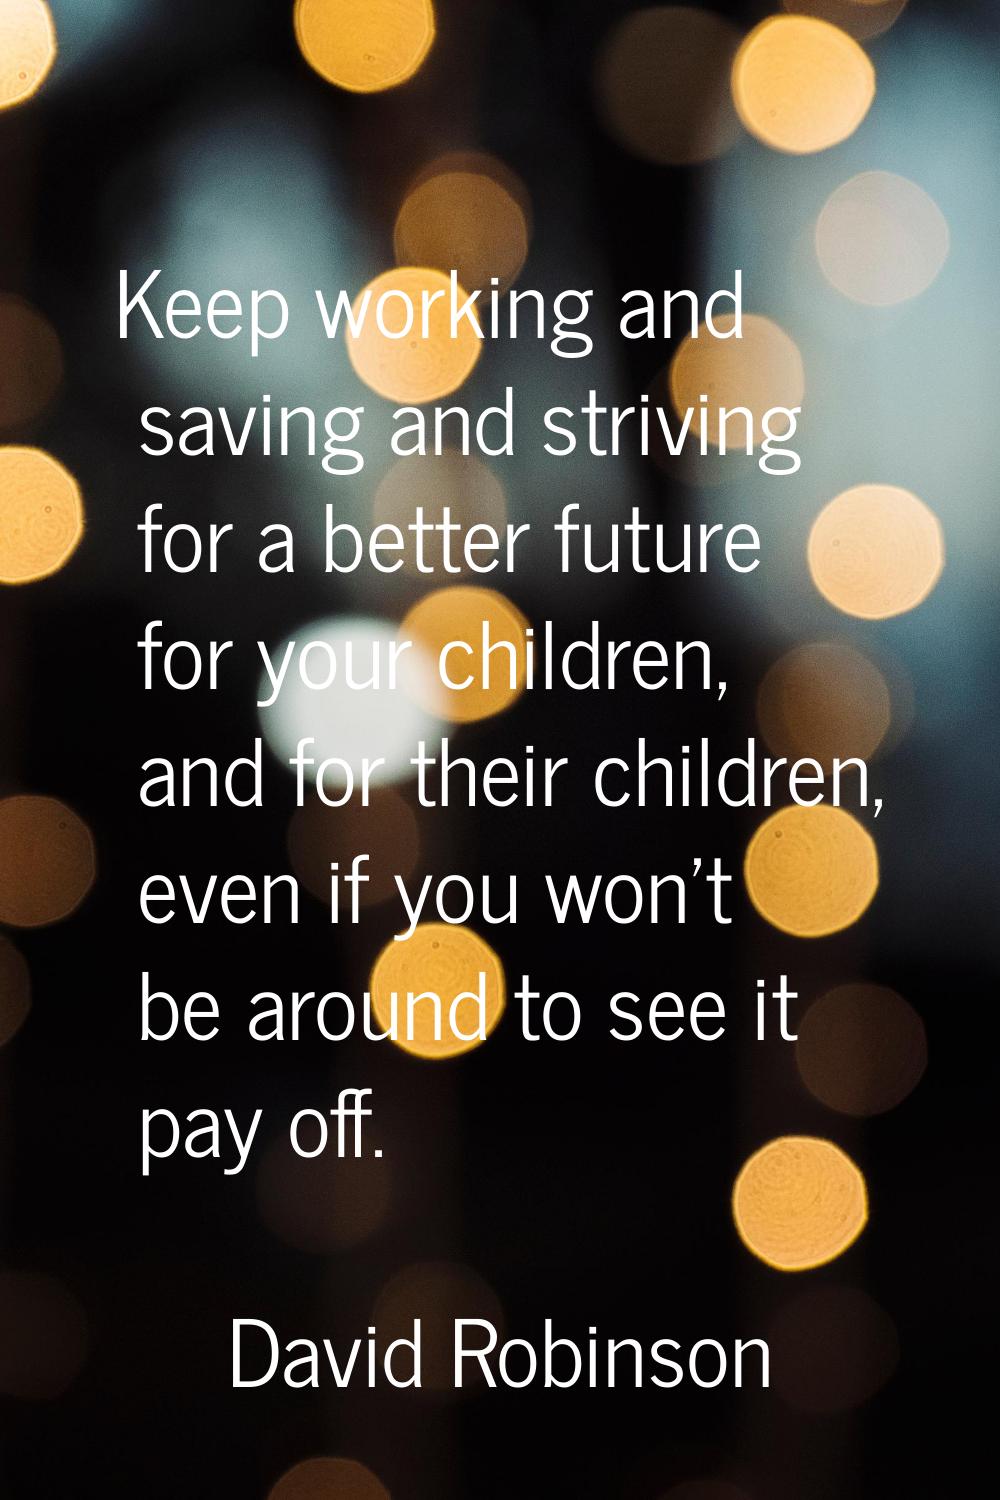 Keep working and saving and striving for a better future for your children, and for their children,